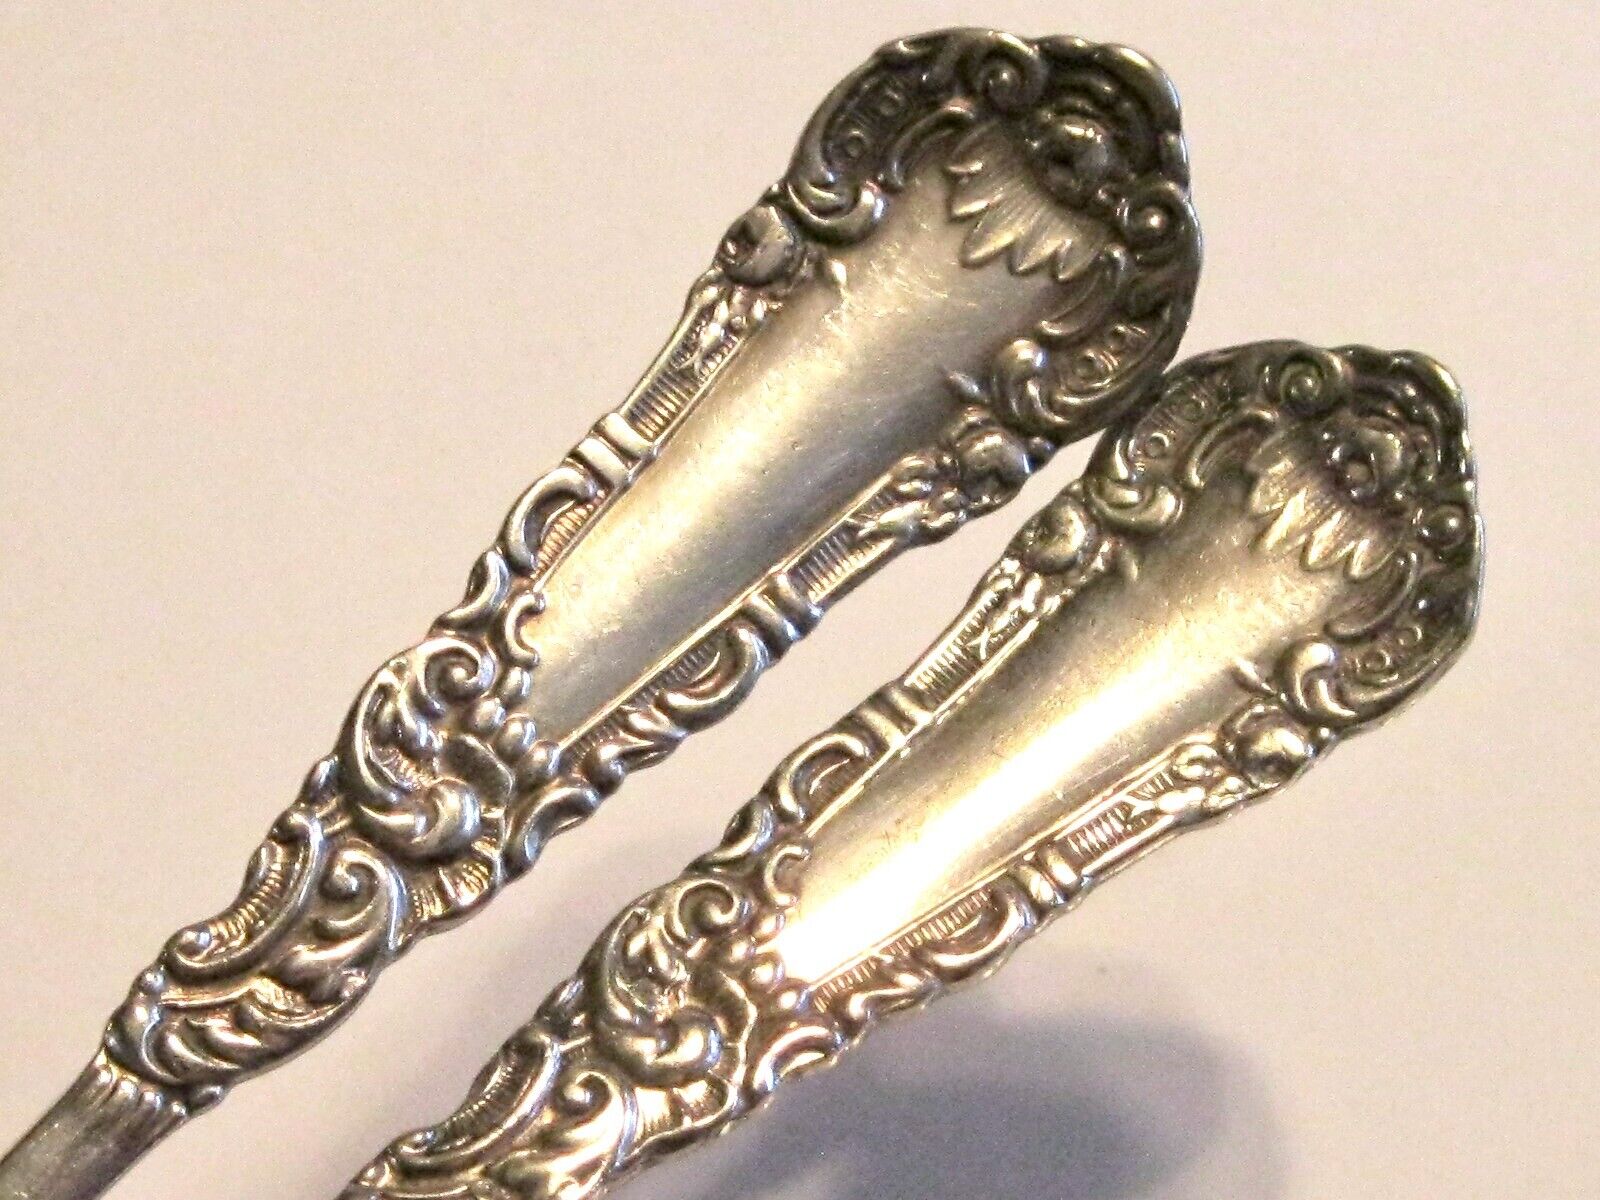 ANTIQUE WILLIAM ROGERS & CO SPOON PAIR EAGLE MARK WM STAR 2 OLD 1800\'s SPOONS